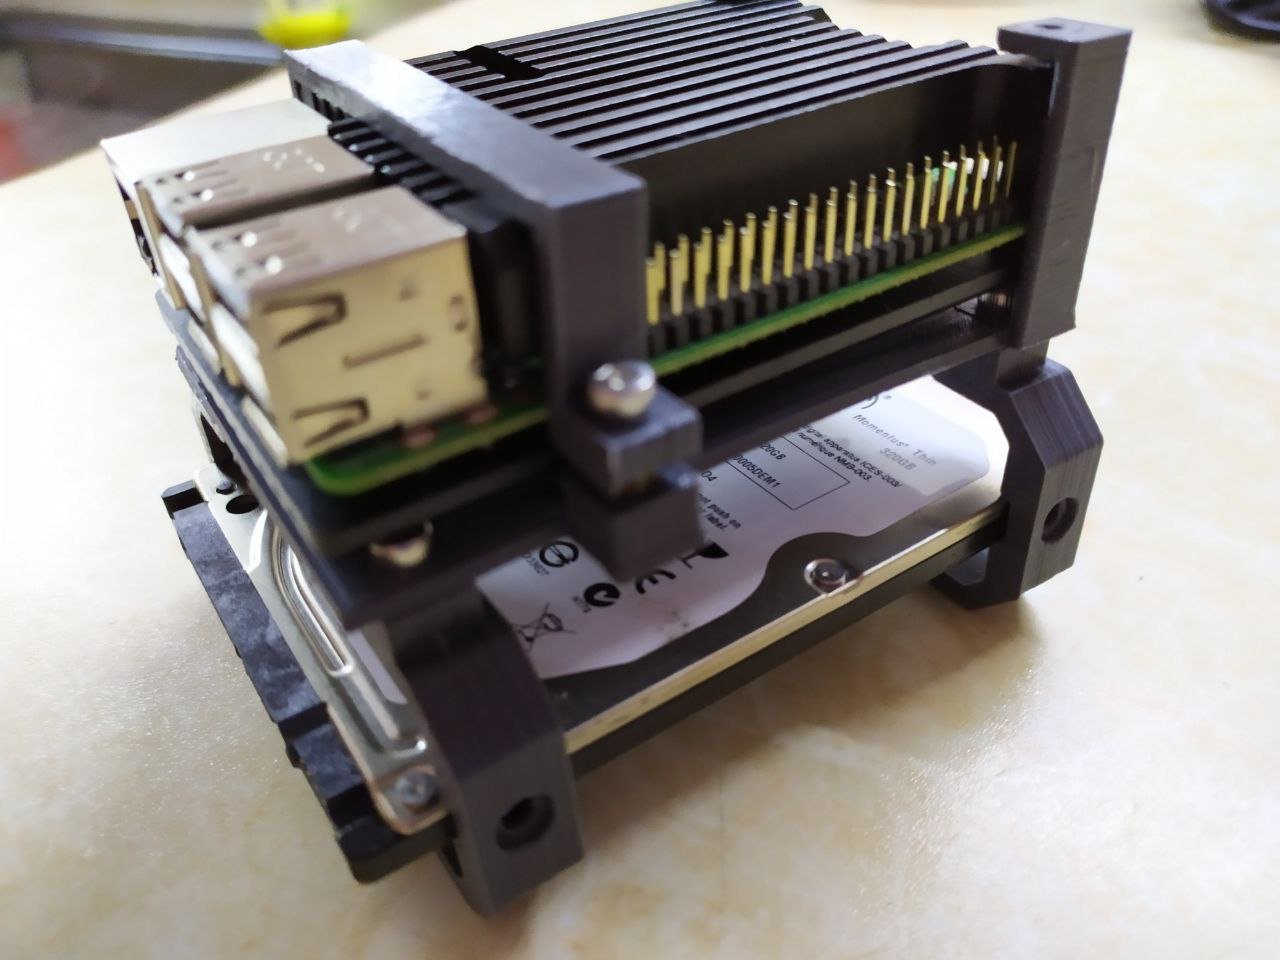 Raspberry Pi with 2.5" ssd/hdd and armored passive cooling case